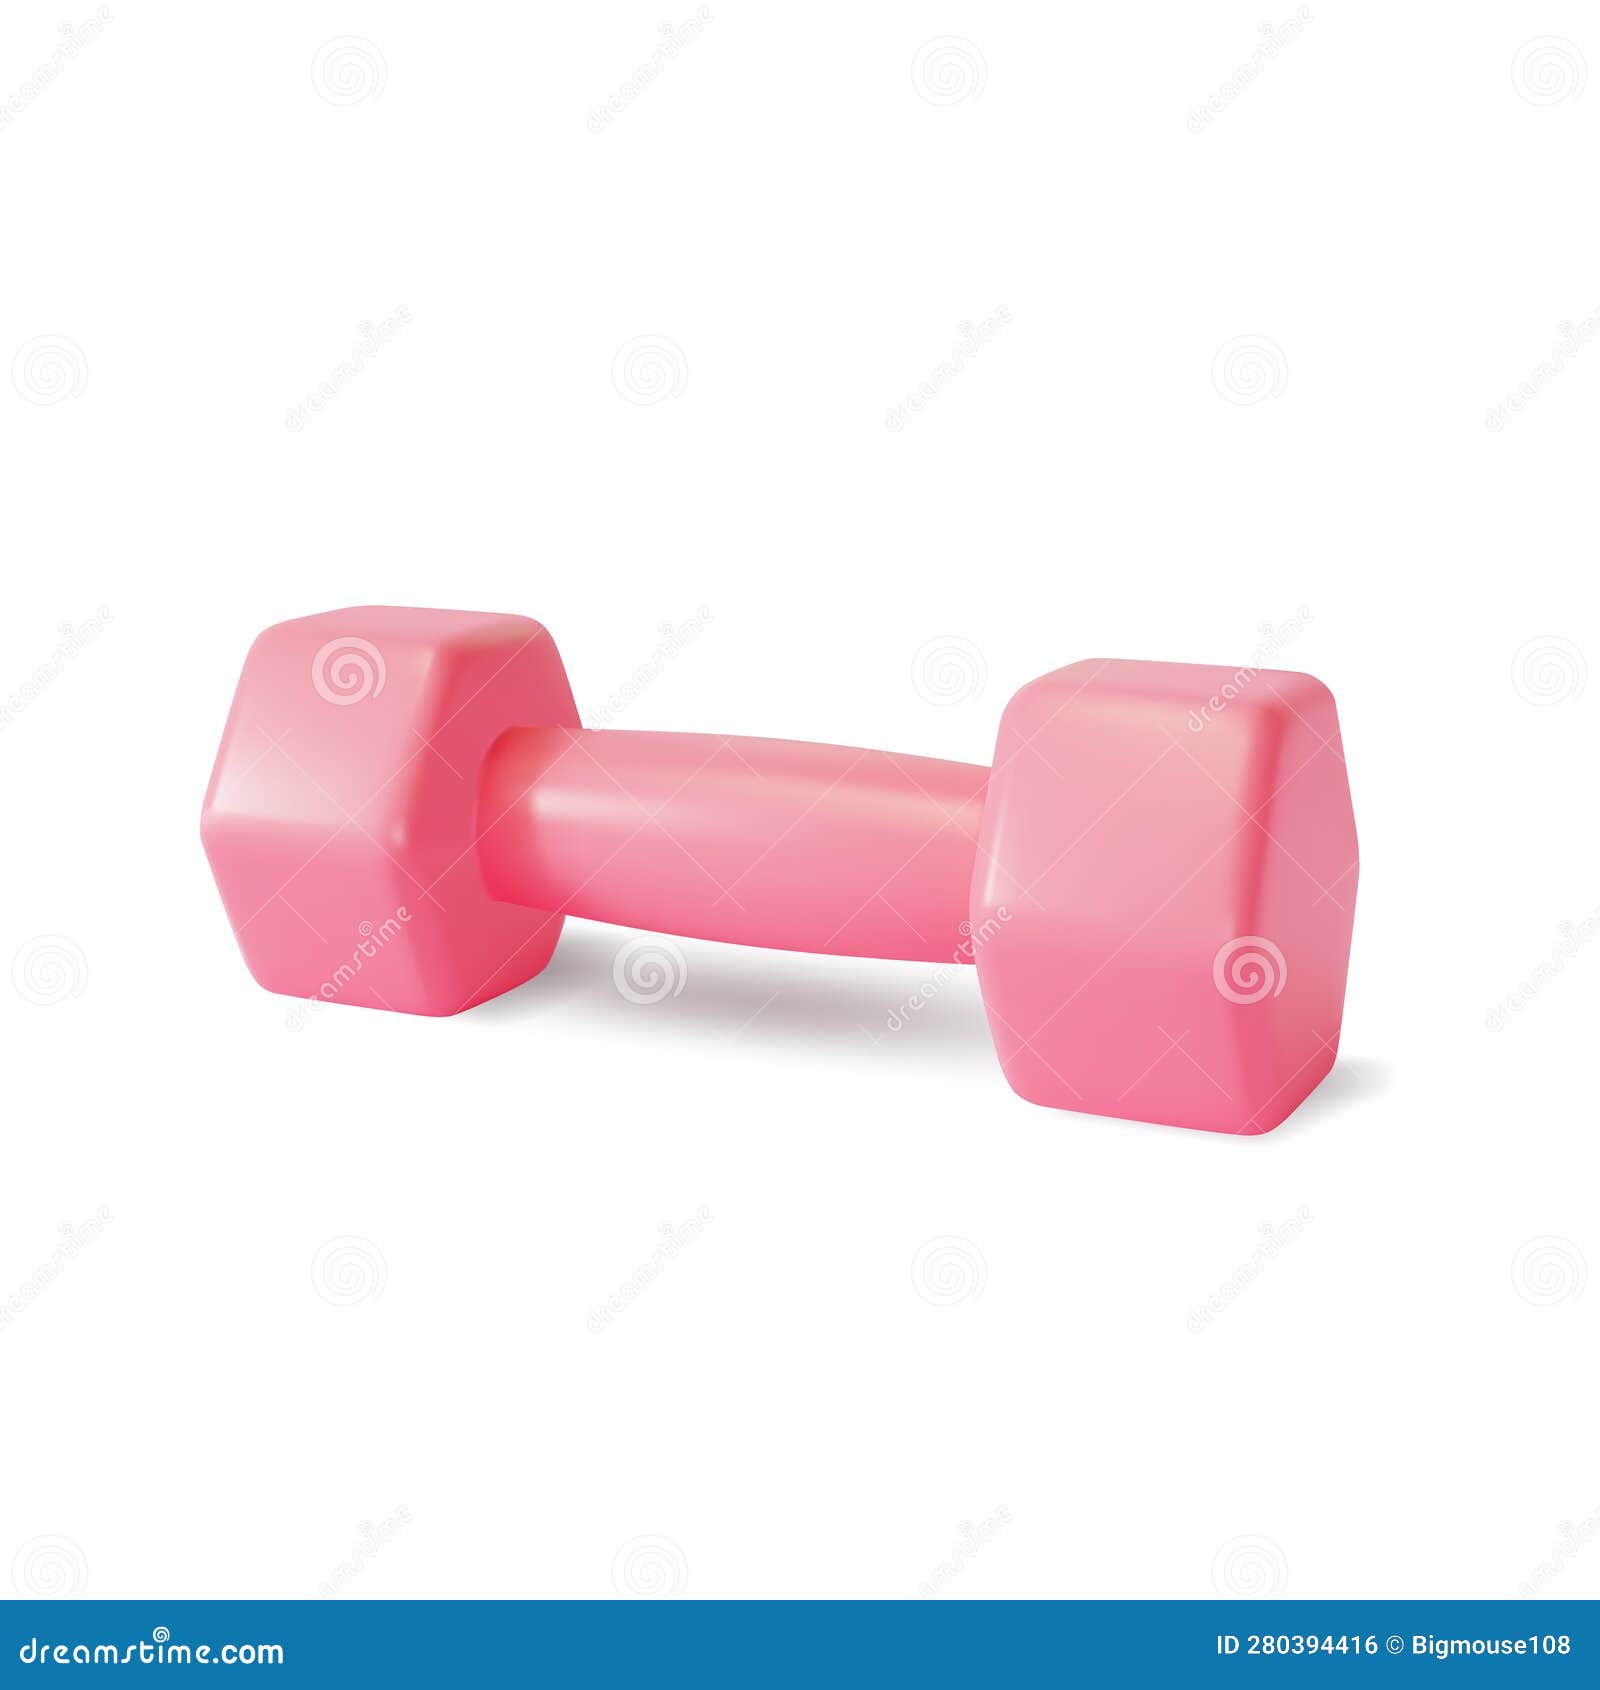 https://thumbs.dreamstime.com/z/d-gym-equipment-pink-dumbbell-cartoon-style-vector-symbol-fitness-exercise-isolated-white-background-illustration-280394416.jpg